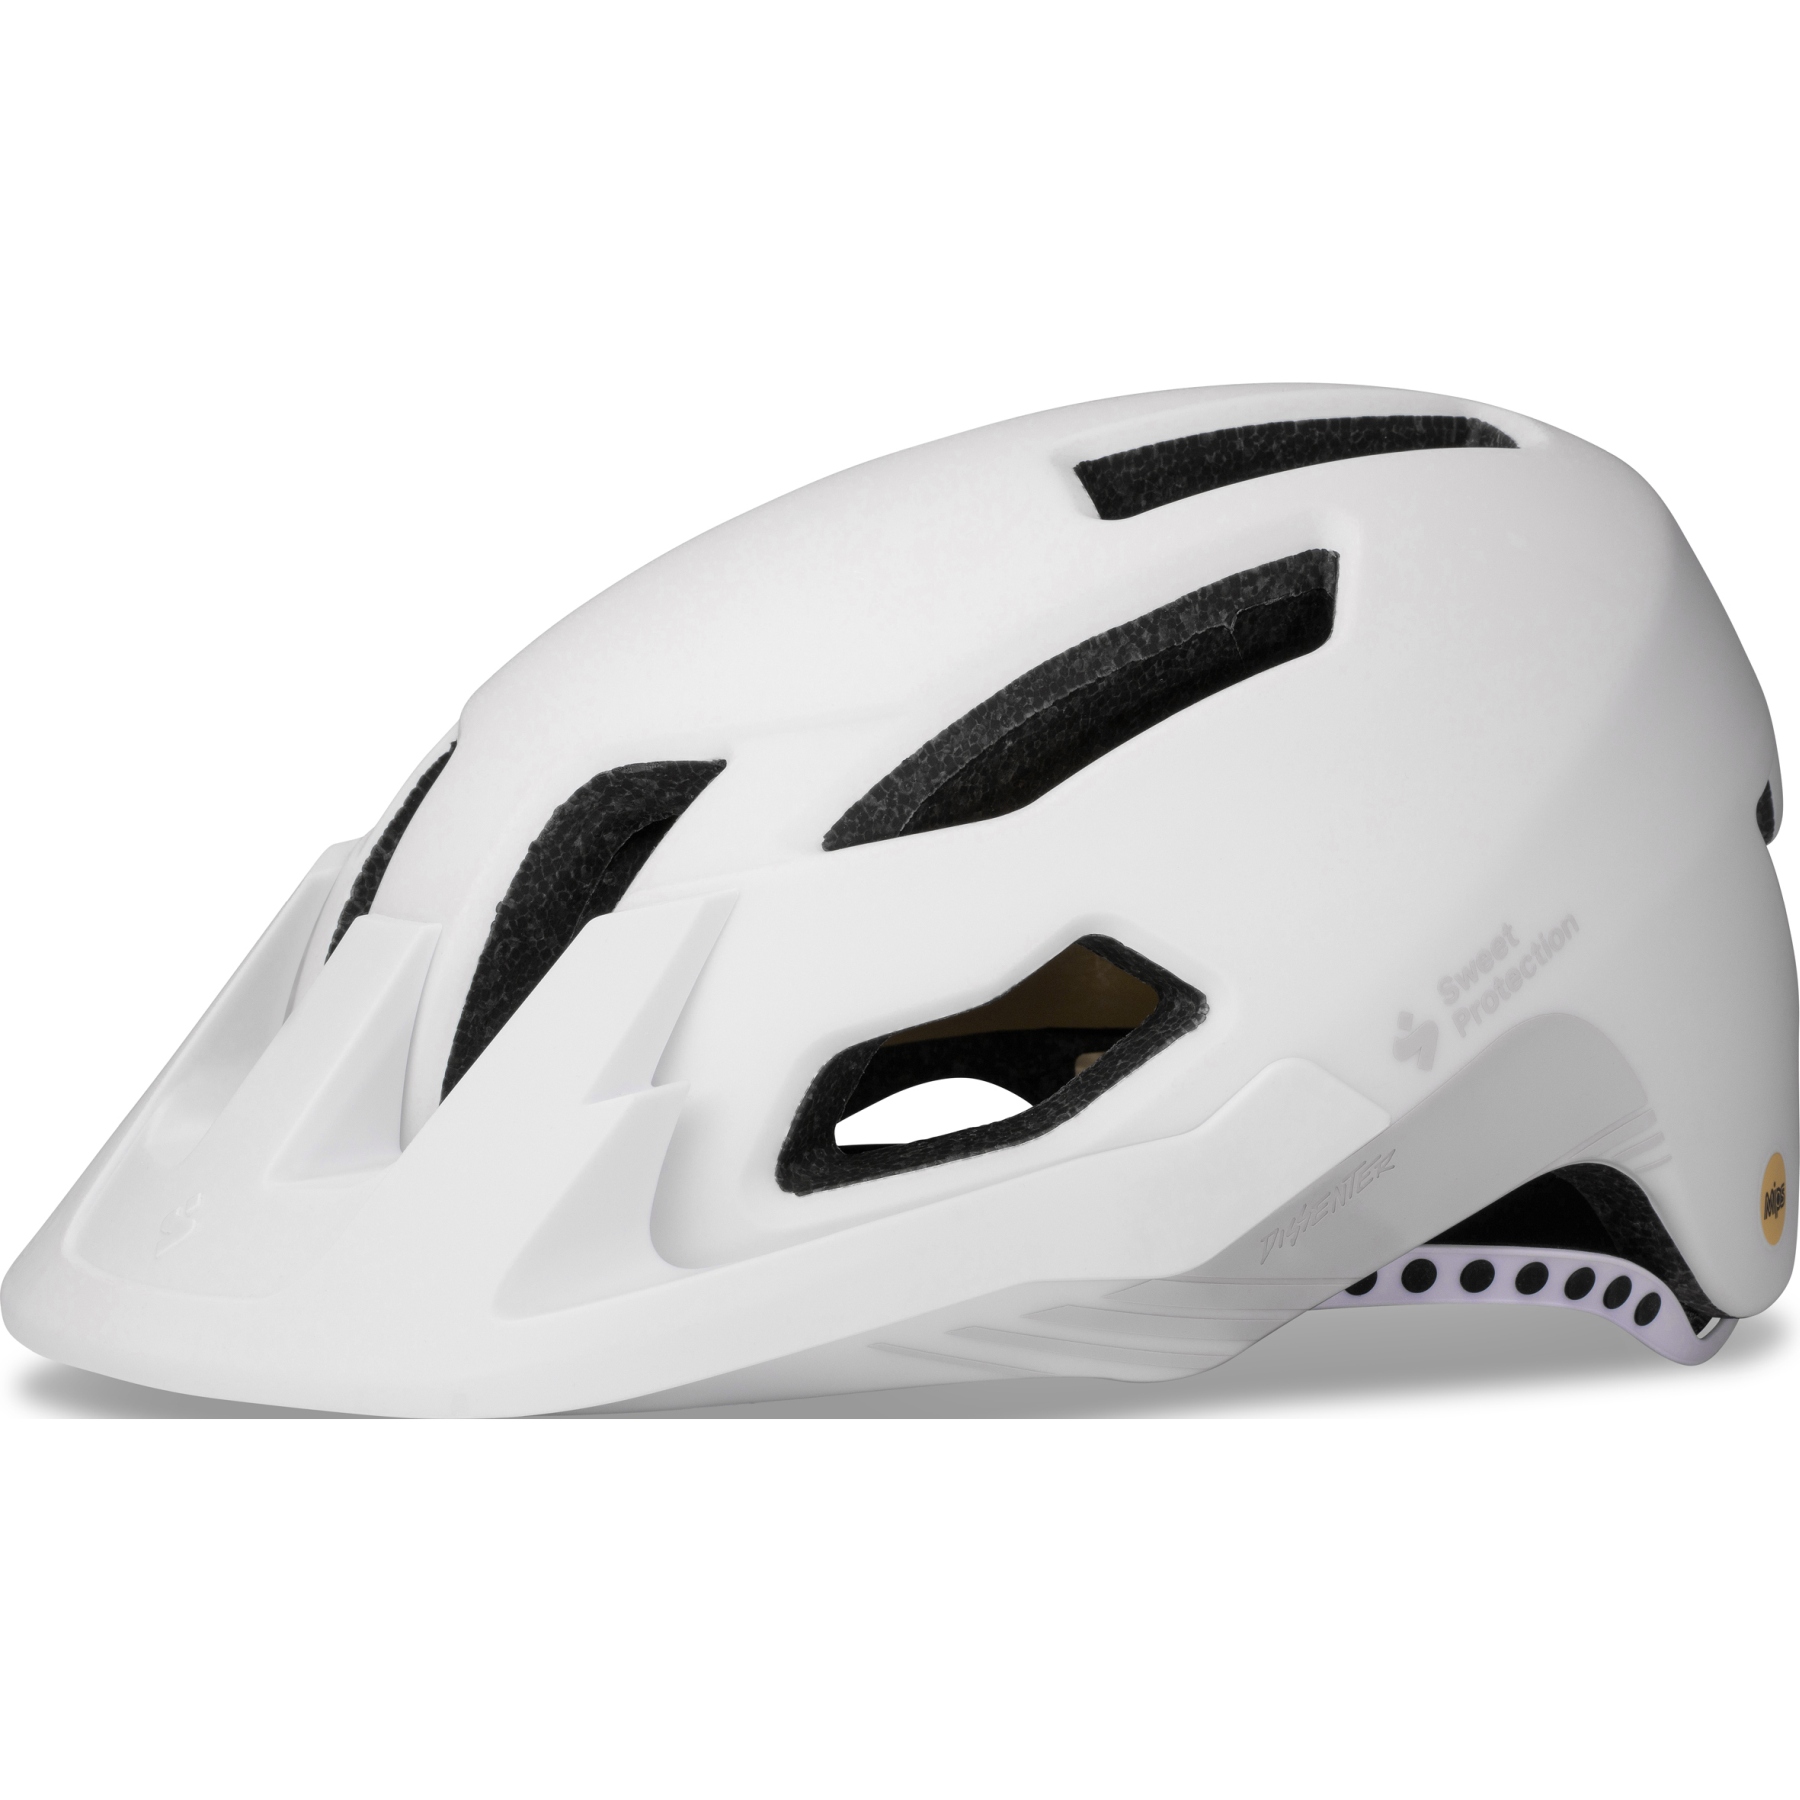 Image of SWEET Protection Dissenter MIPS Helmet - Matte White